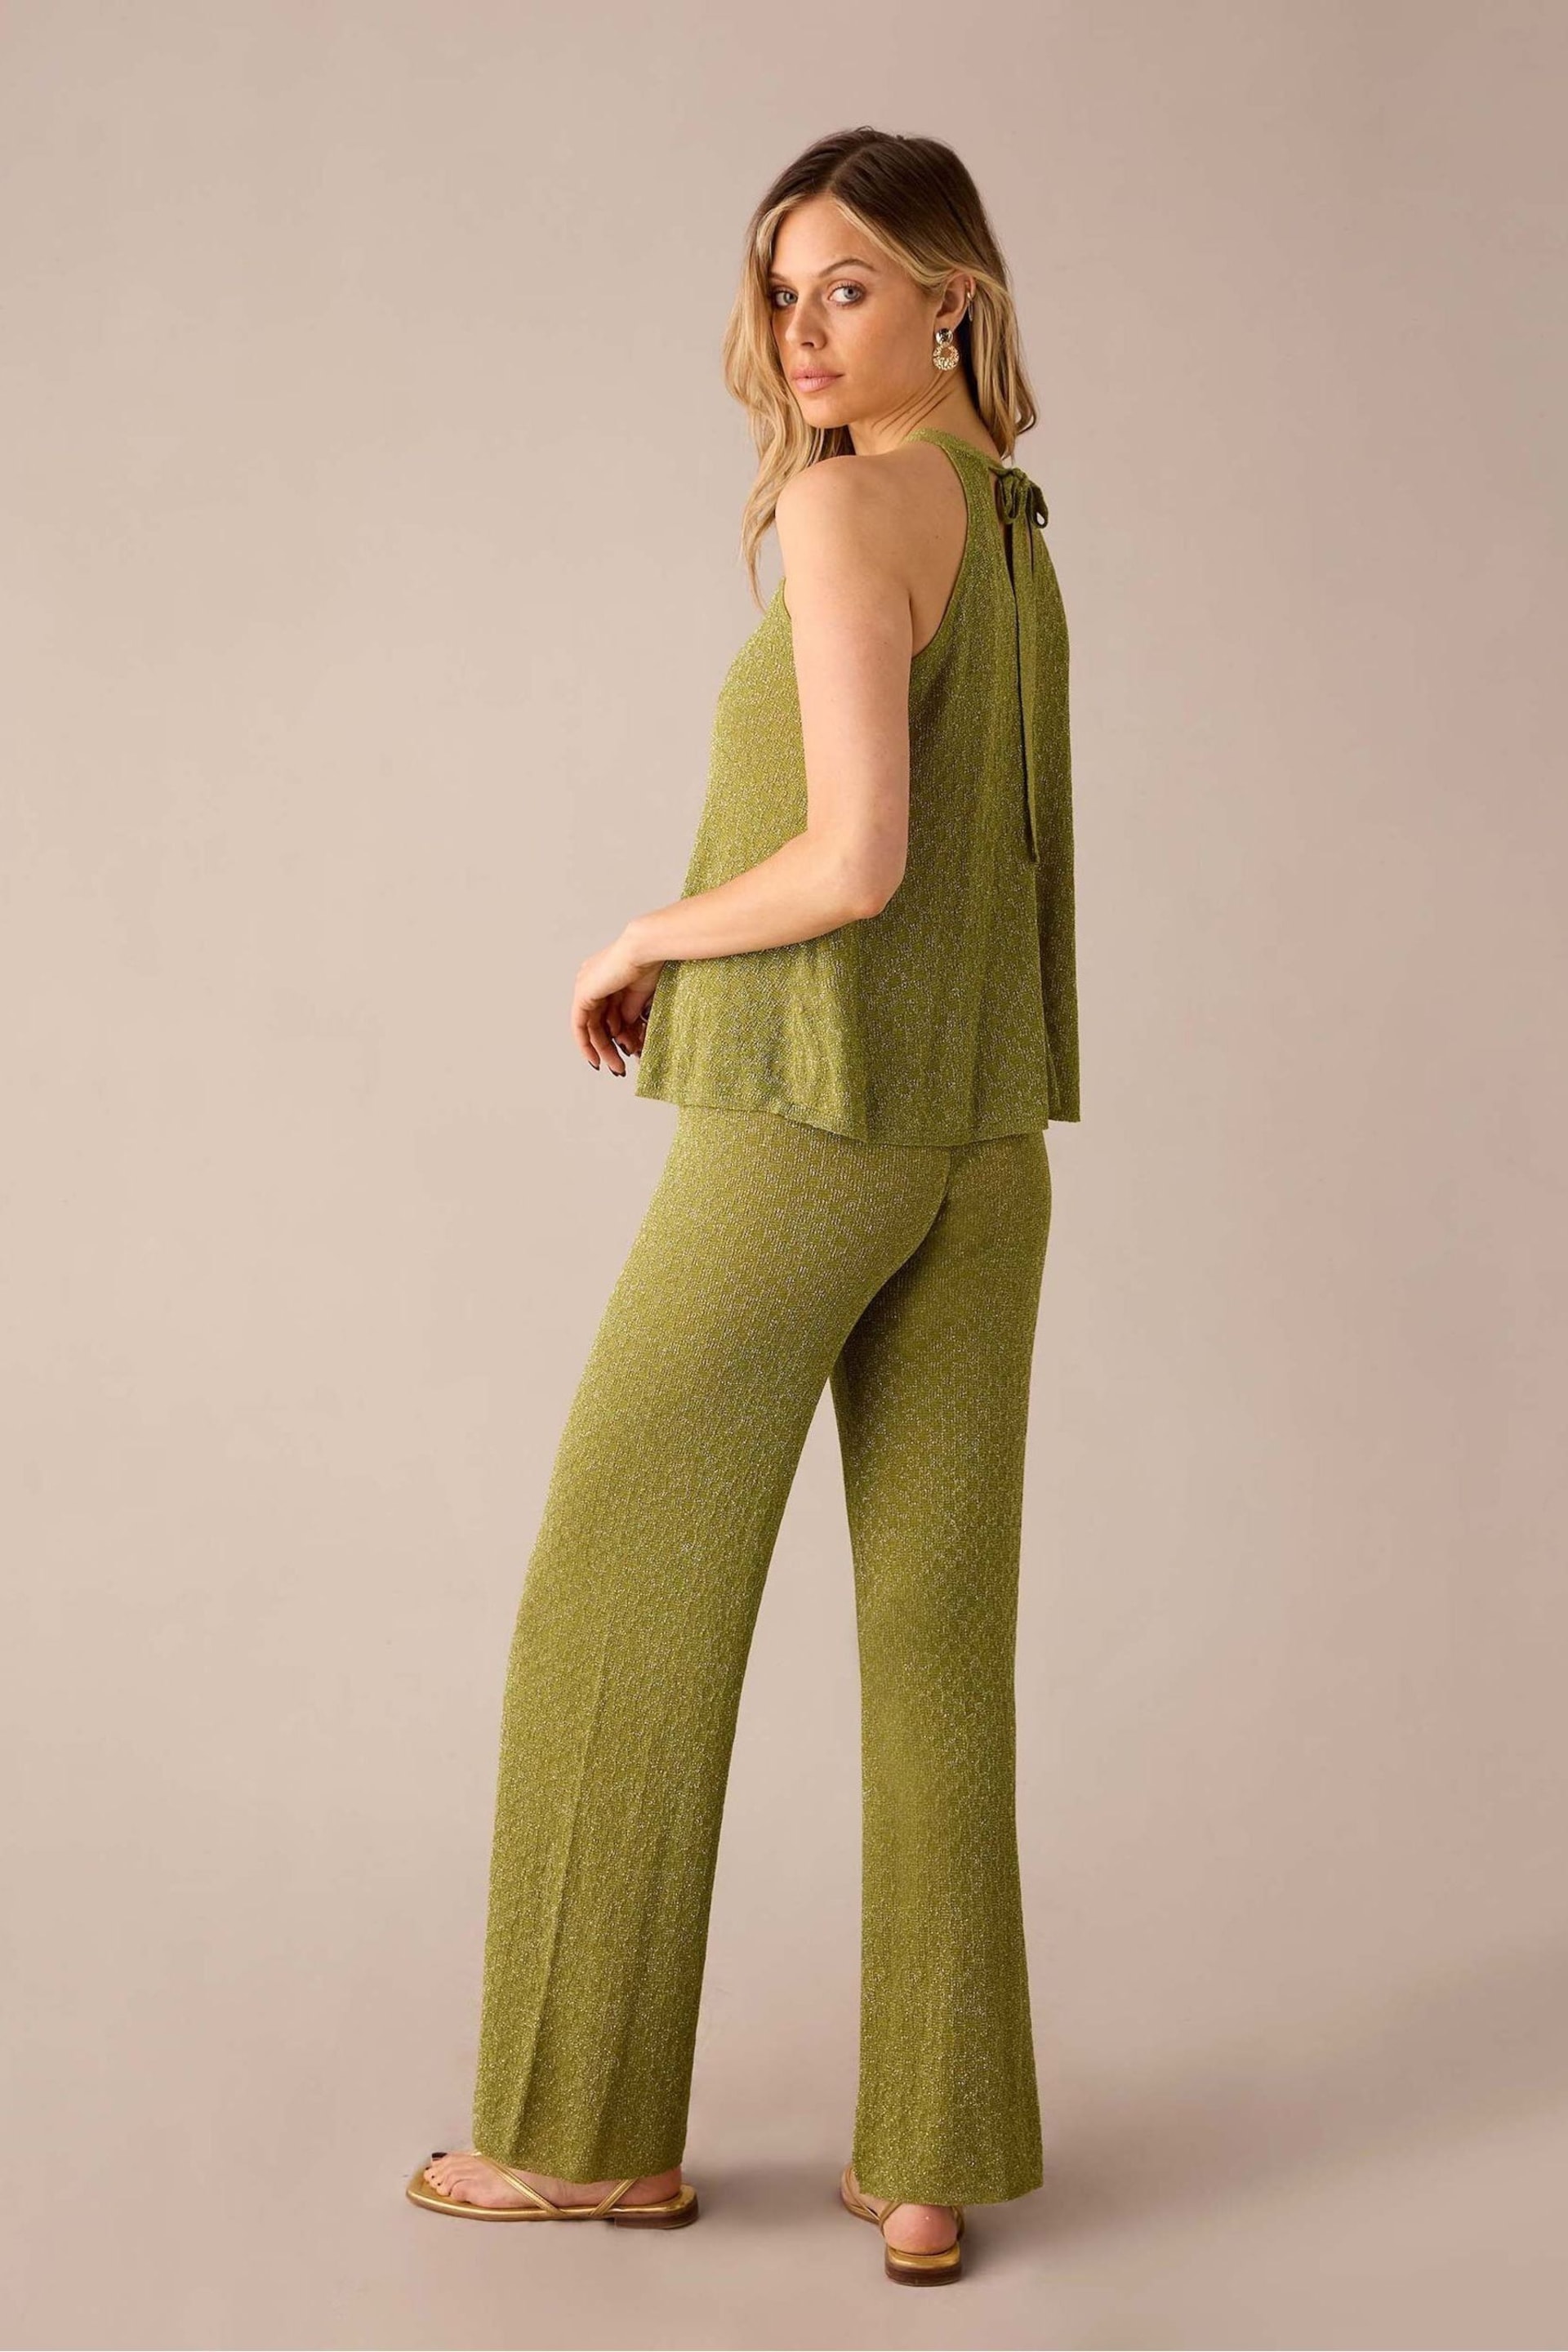 Ro&Zo Green Sheer Sparkle Knit Flared Trousers - Image 4 of 7